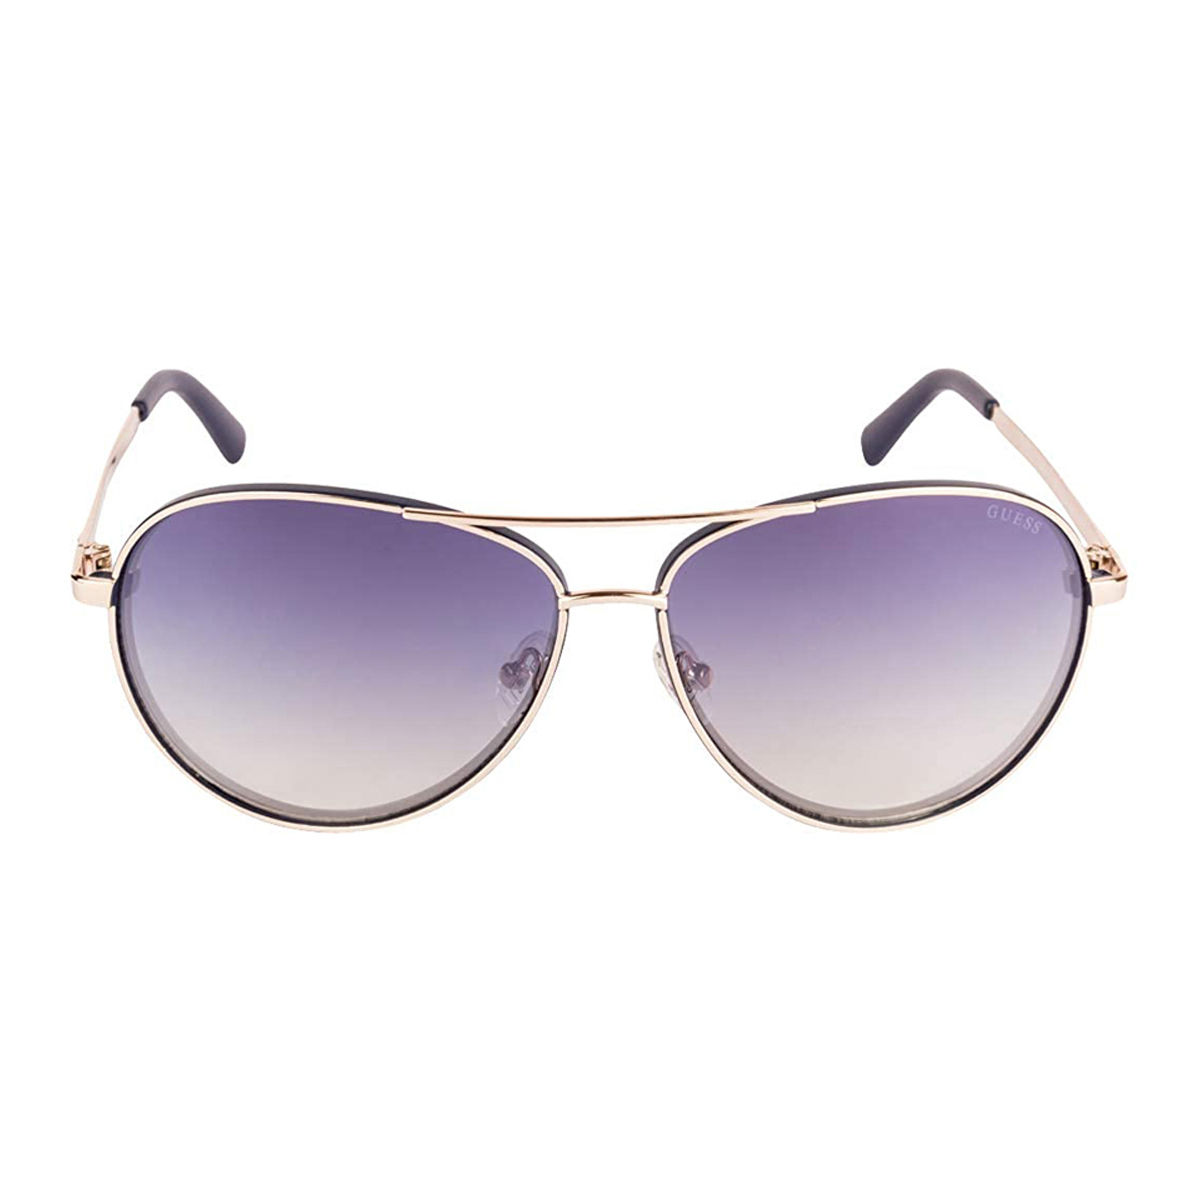 Guess Sunglasses Aviator With Blue Lens For Men